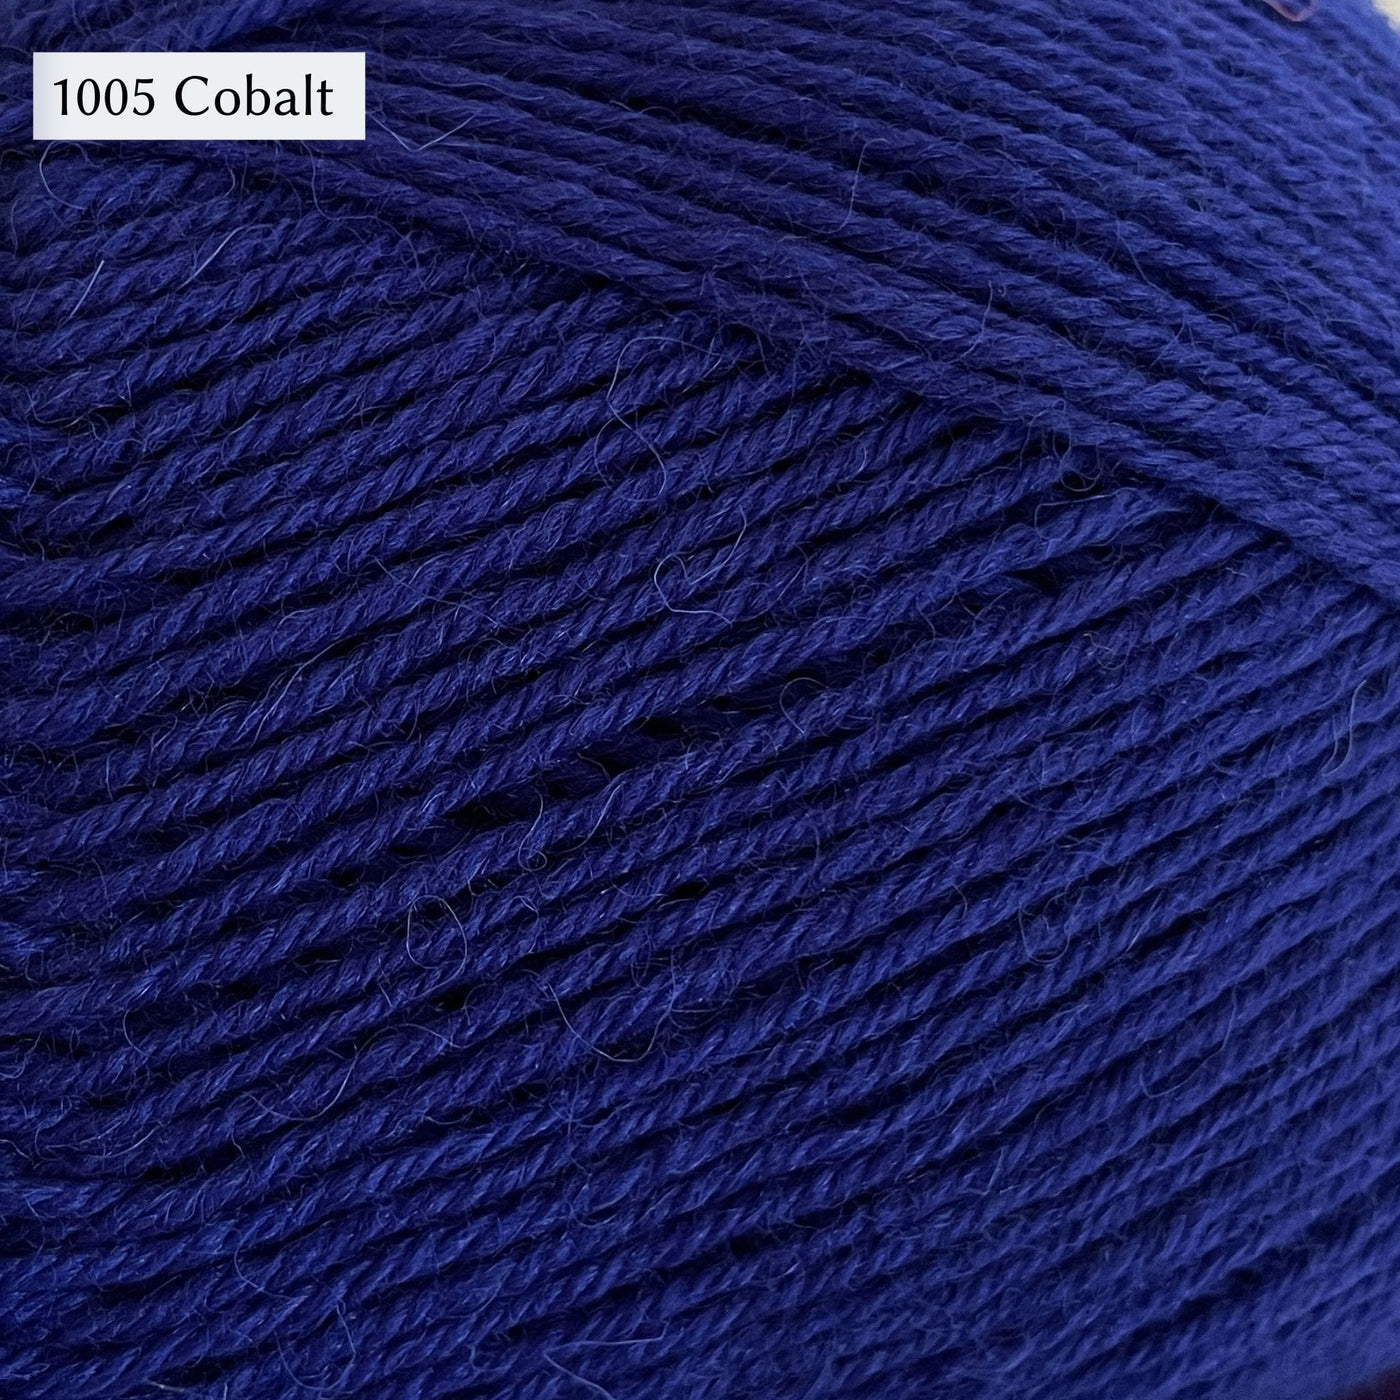 West Yorkshire Spinners Signature 4ply yarn, 100-gram ball, fingering weight, in color 1005 Cobalt, a saturated primary blue